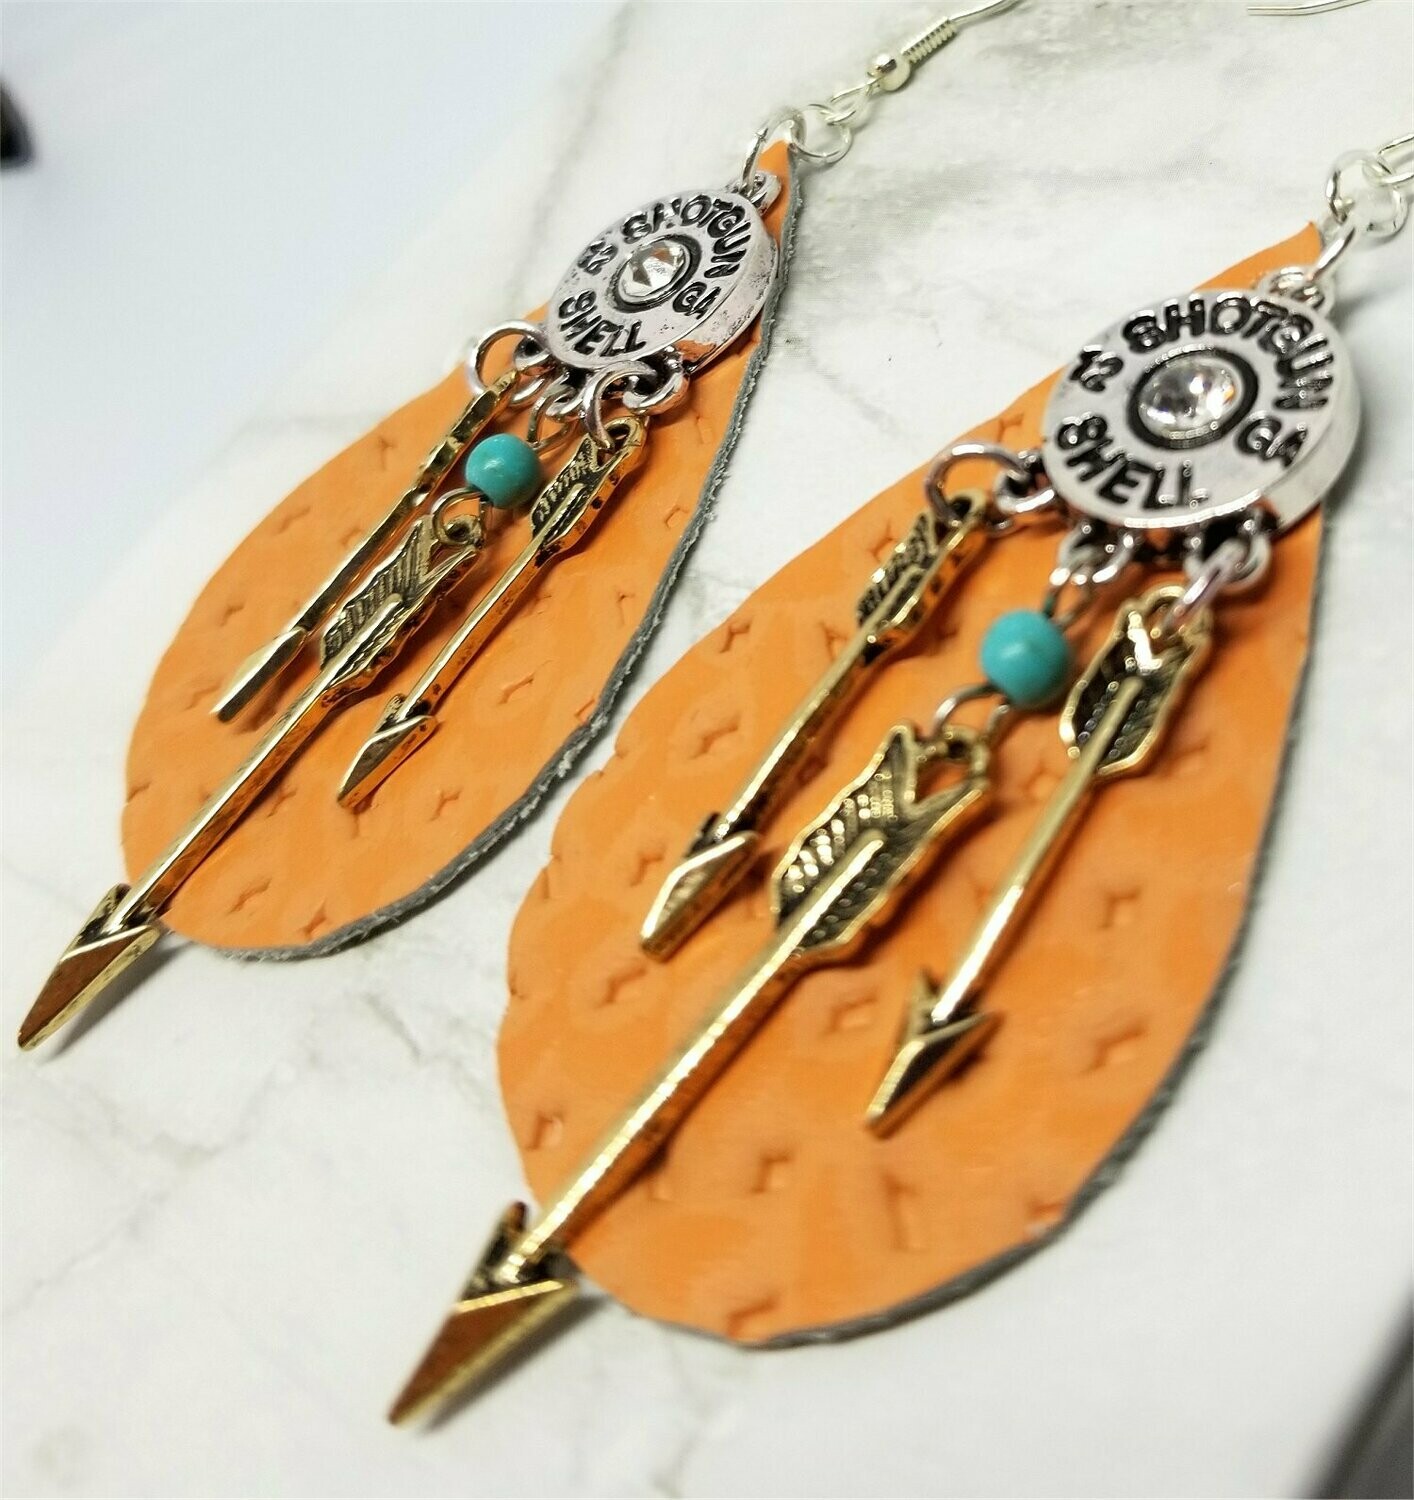 Real Leather Tear Drop Earrings with Arrows Dangling from a Shotgun Shell Charm